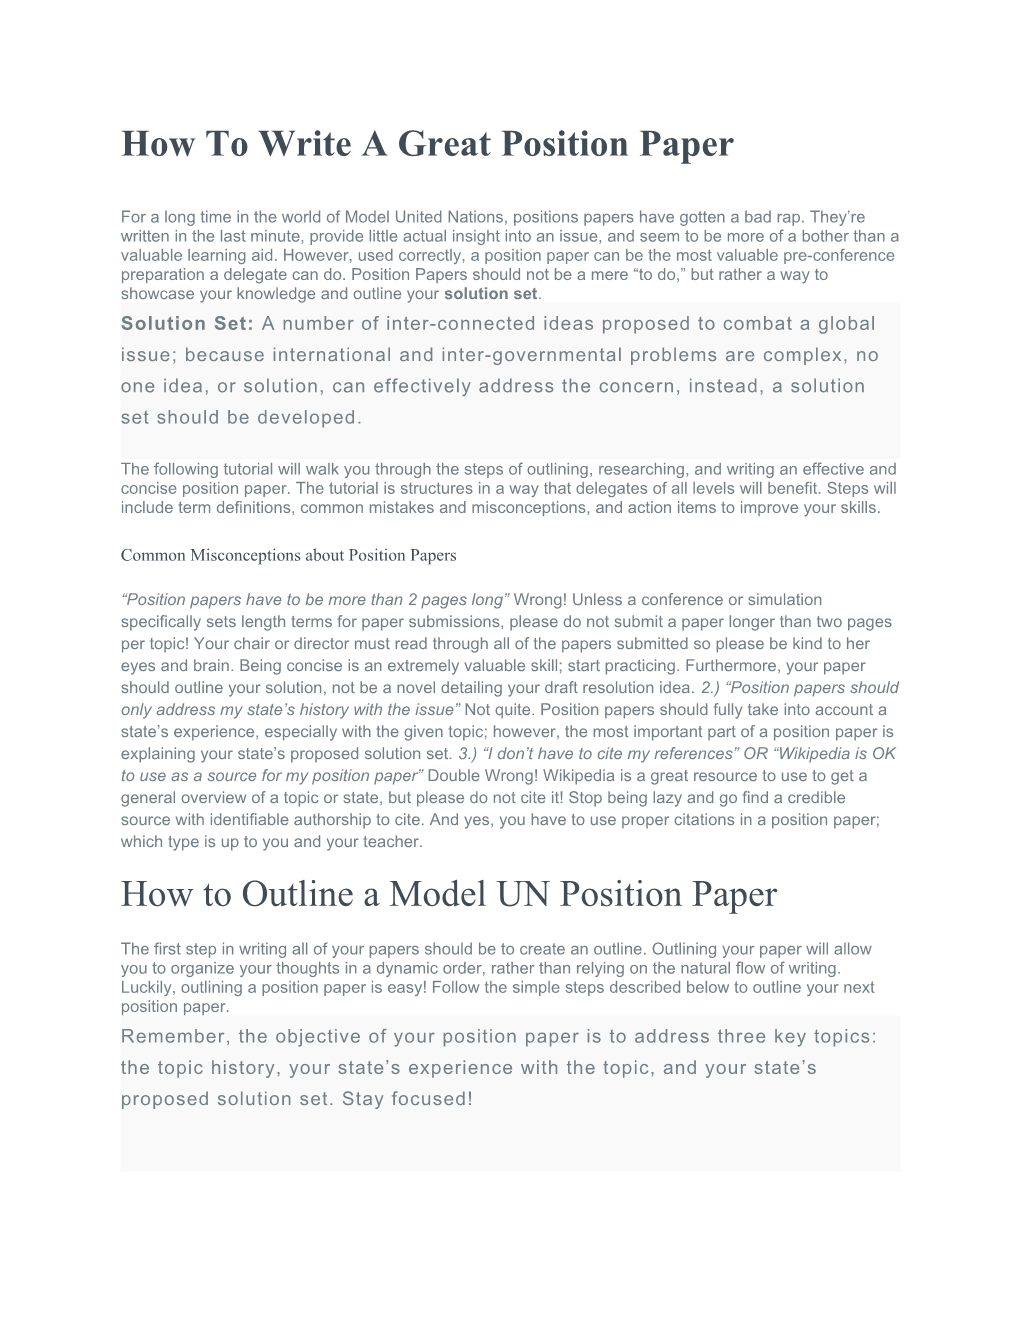 How to Write a Great Position Paper